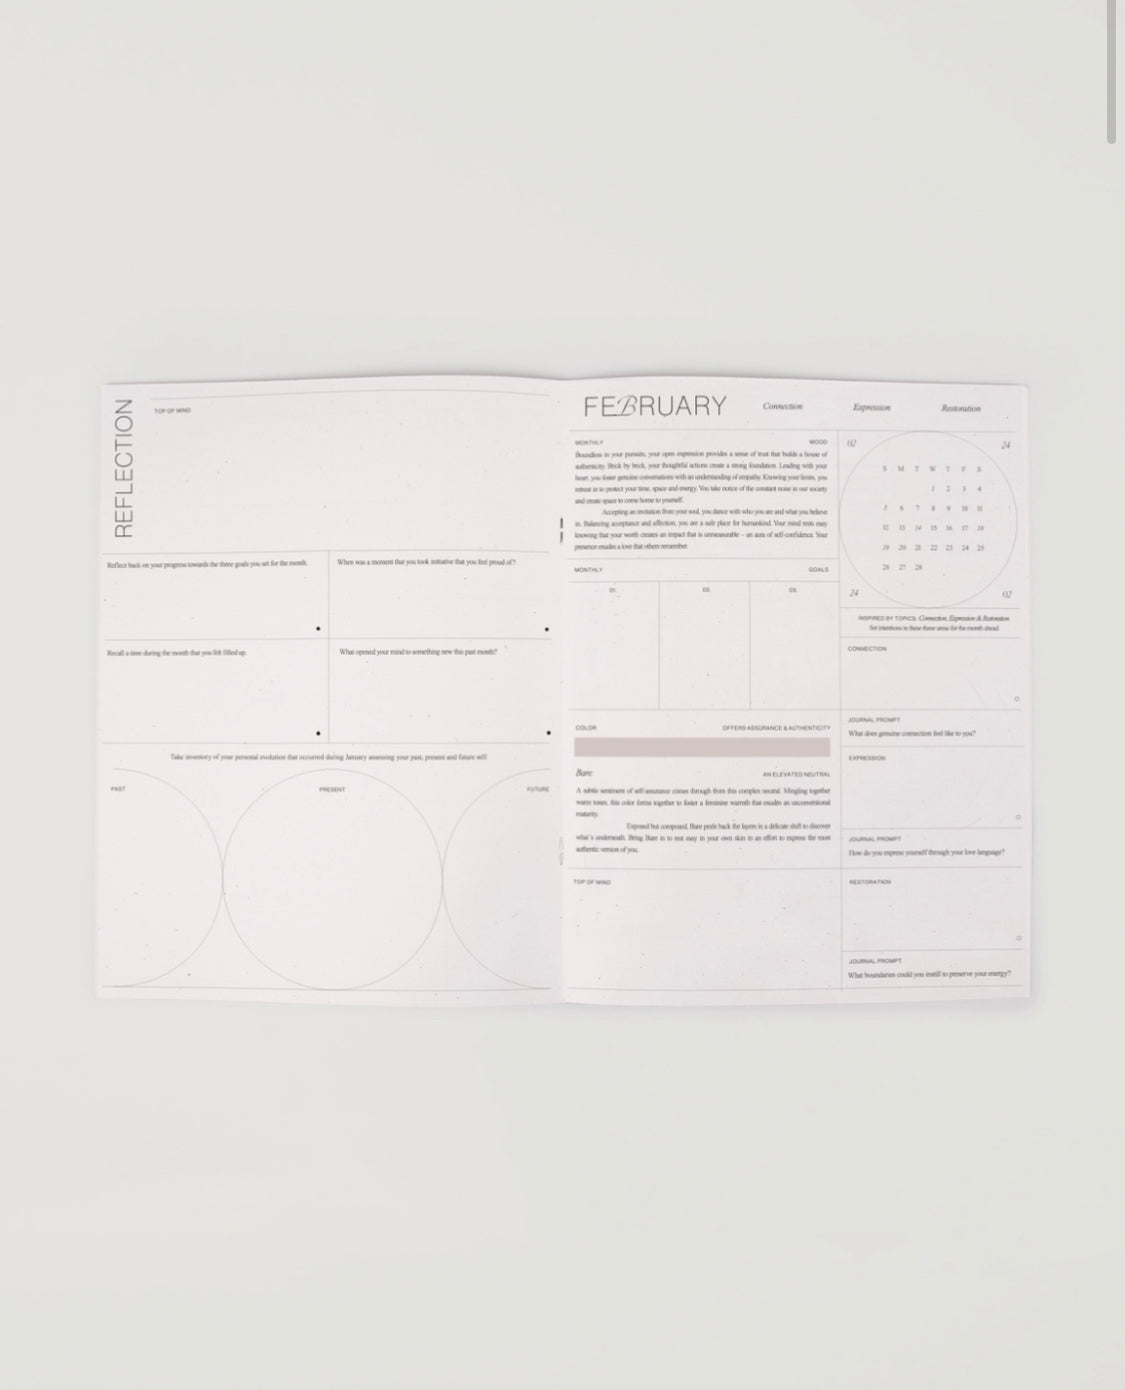 2024 Intentional Planner